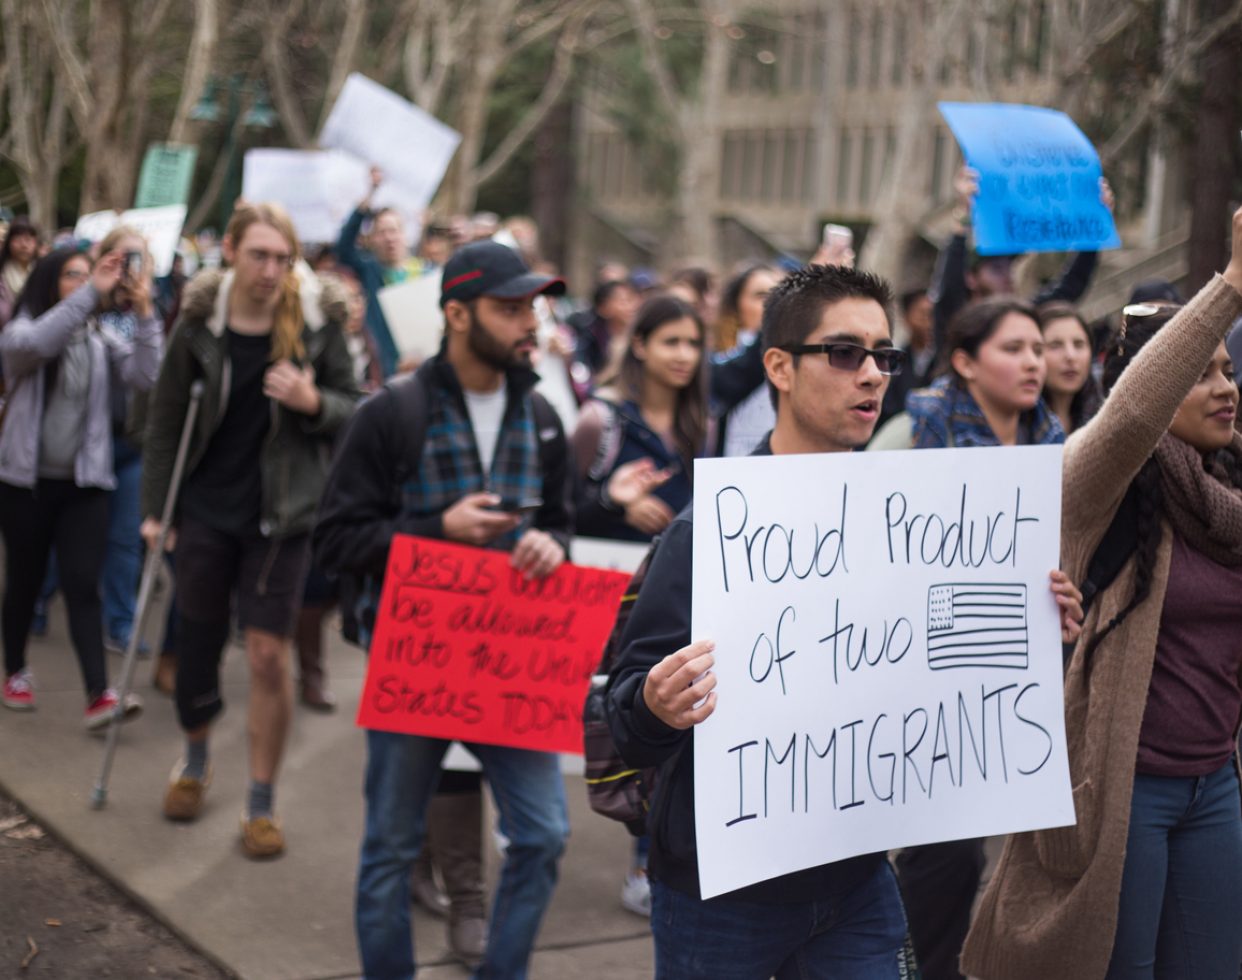 Demonstrators march through the Sacramento State campus during a #NoBanNoWall protest on Feb. 2, 2017. An estimated 300 people attended.